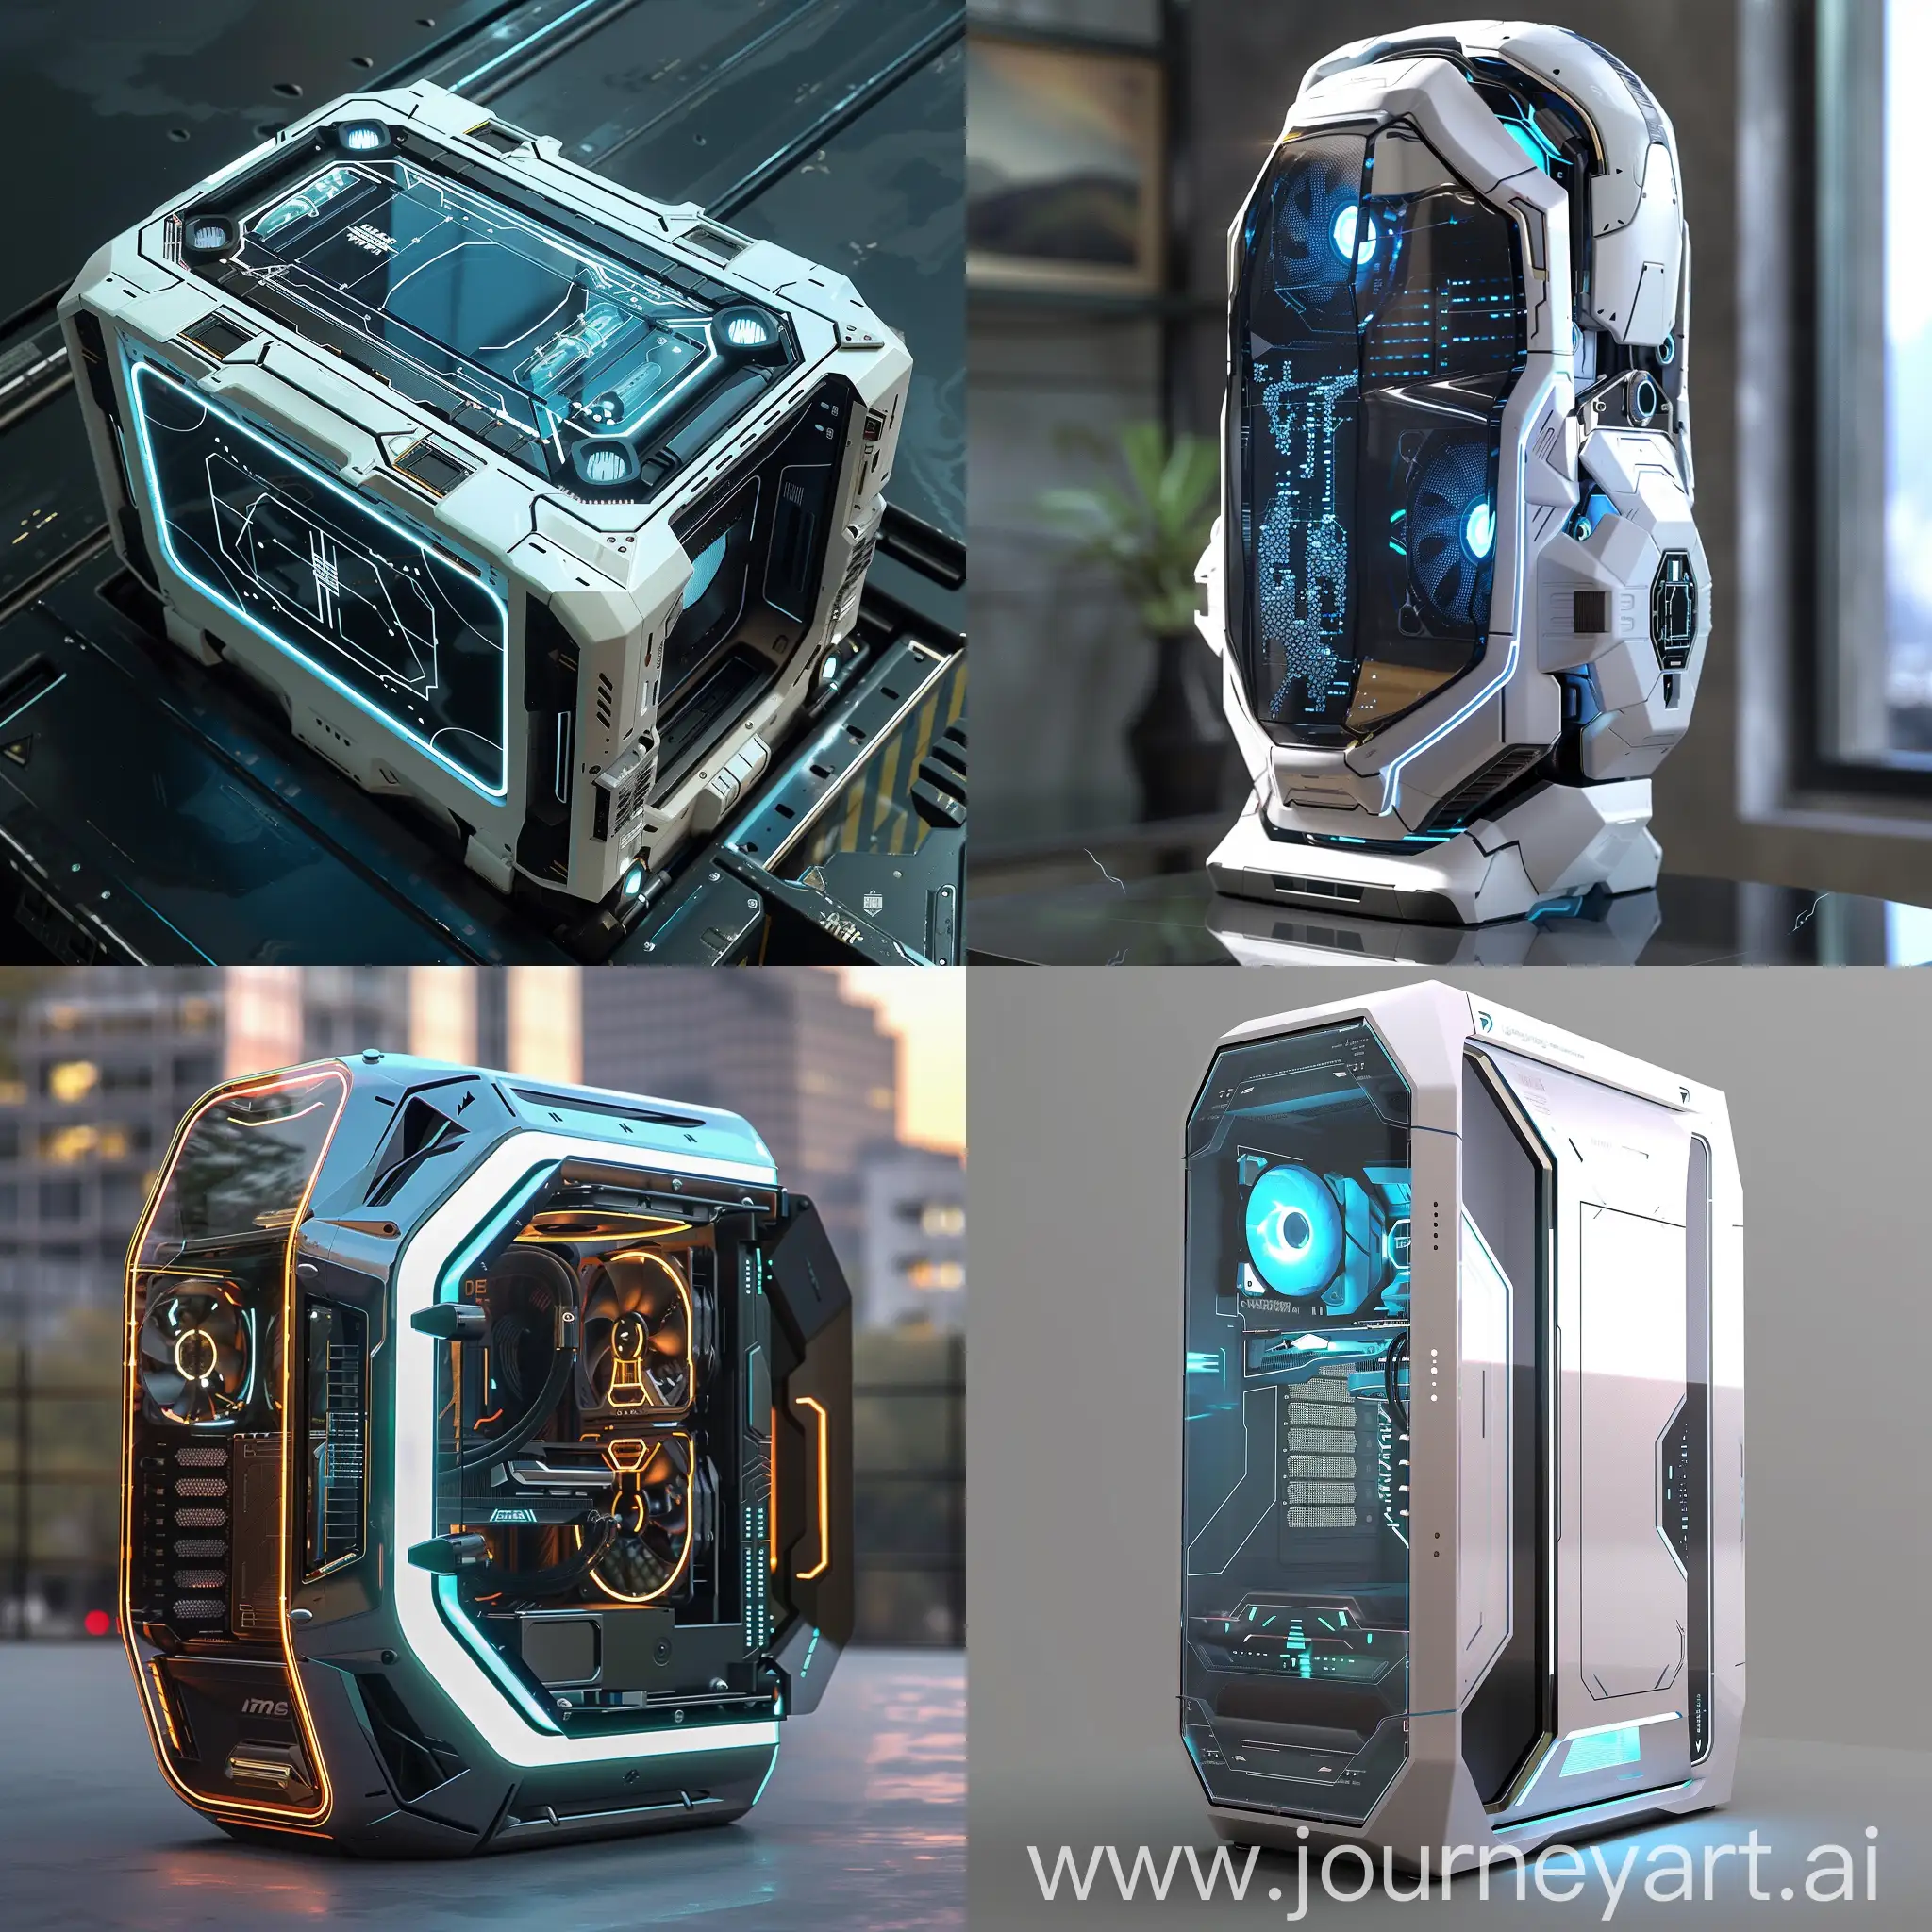 Futuristic-PC-Case-with-Advanced-Technology-and-EcoFriendly-Materials